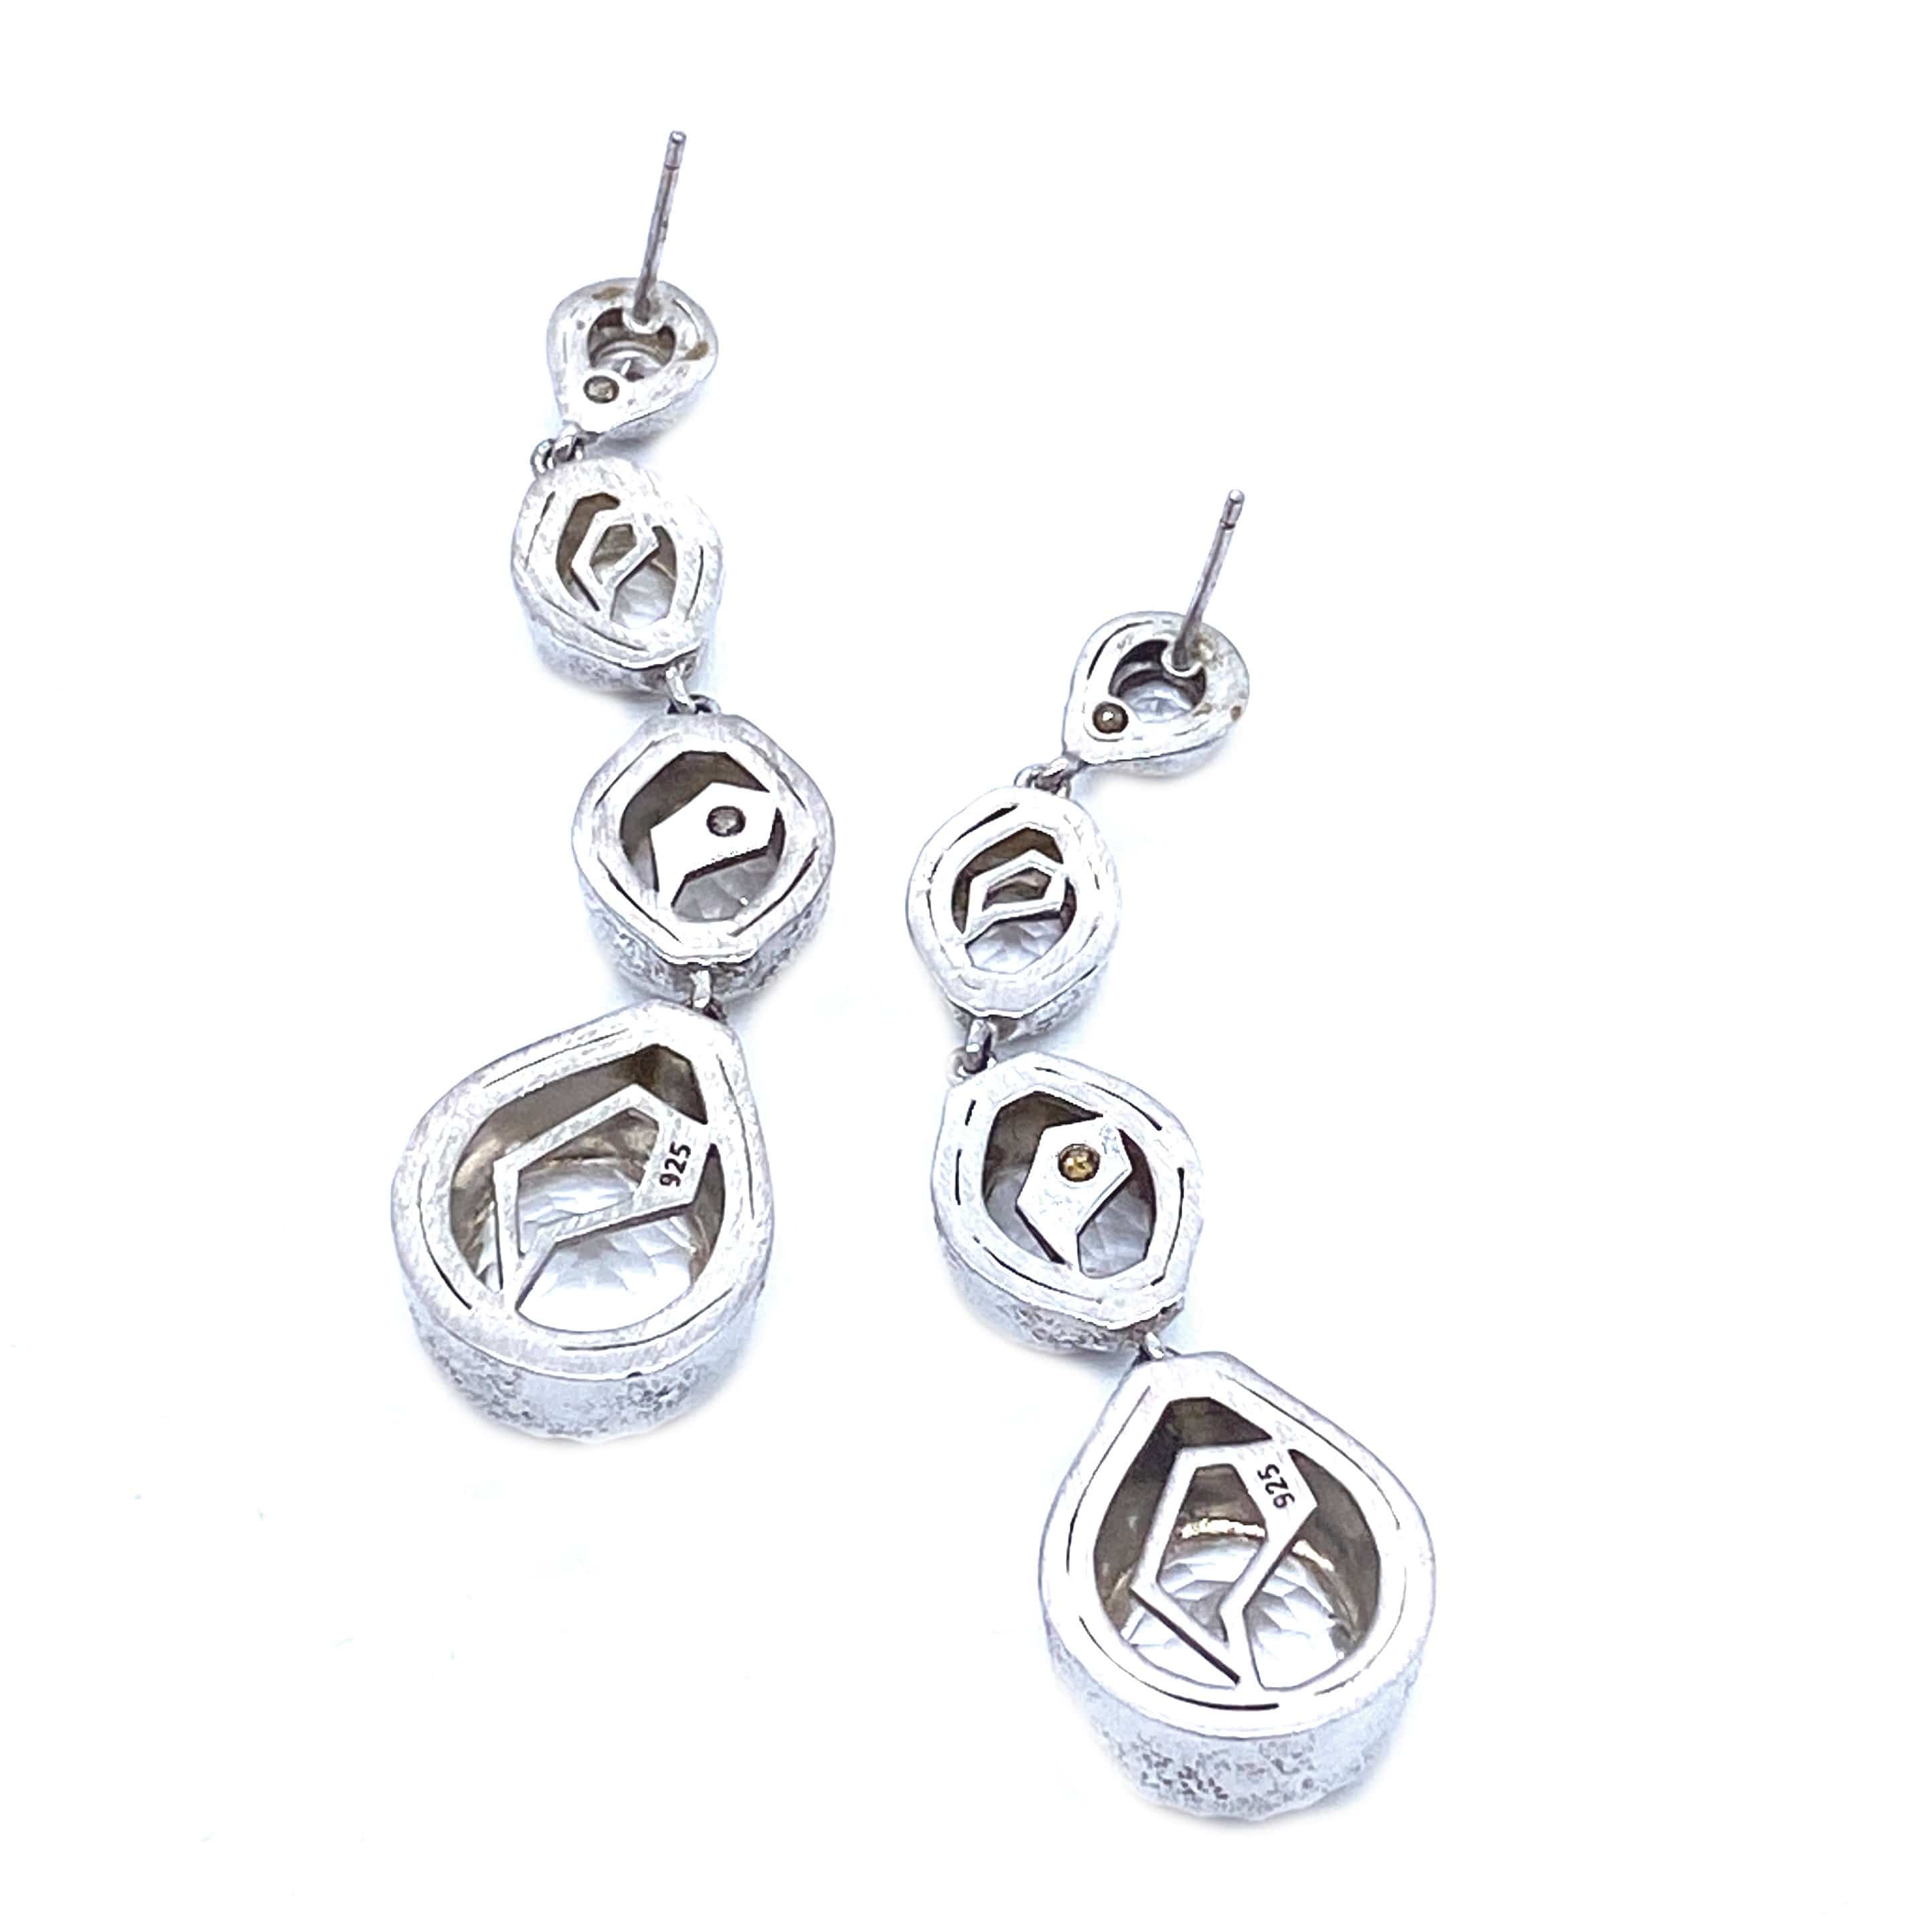 Dune Drop Earrings Set in Sterling Silver with Faceted Stone - Coomi